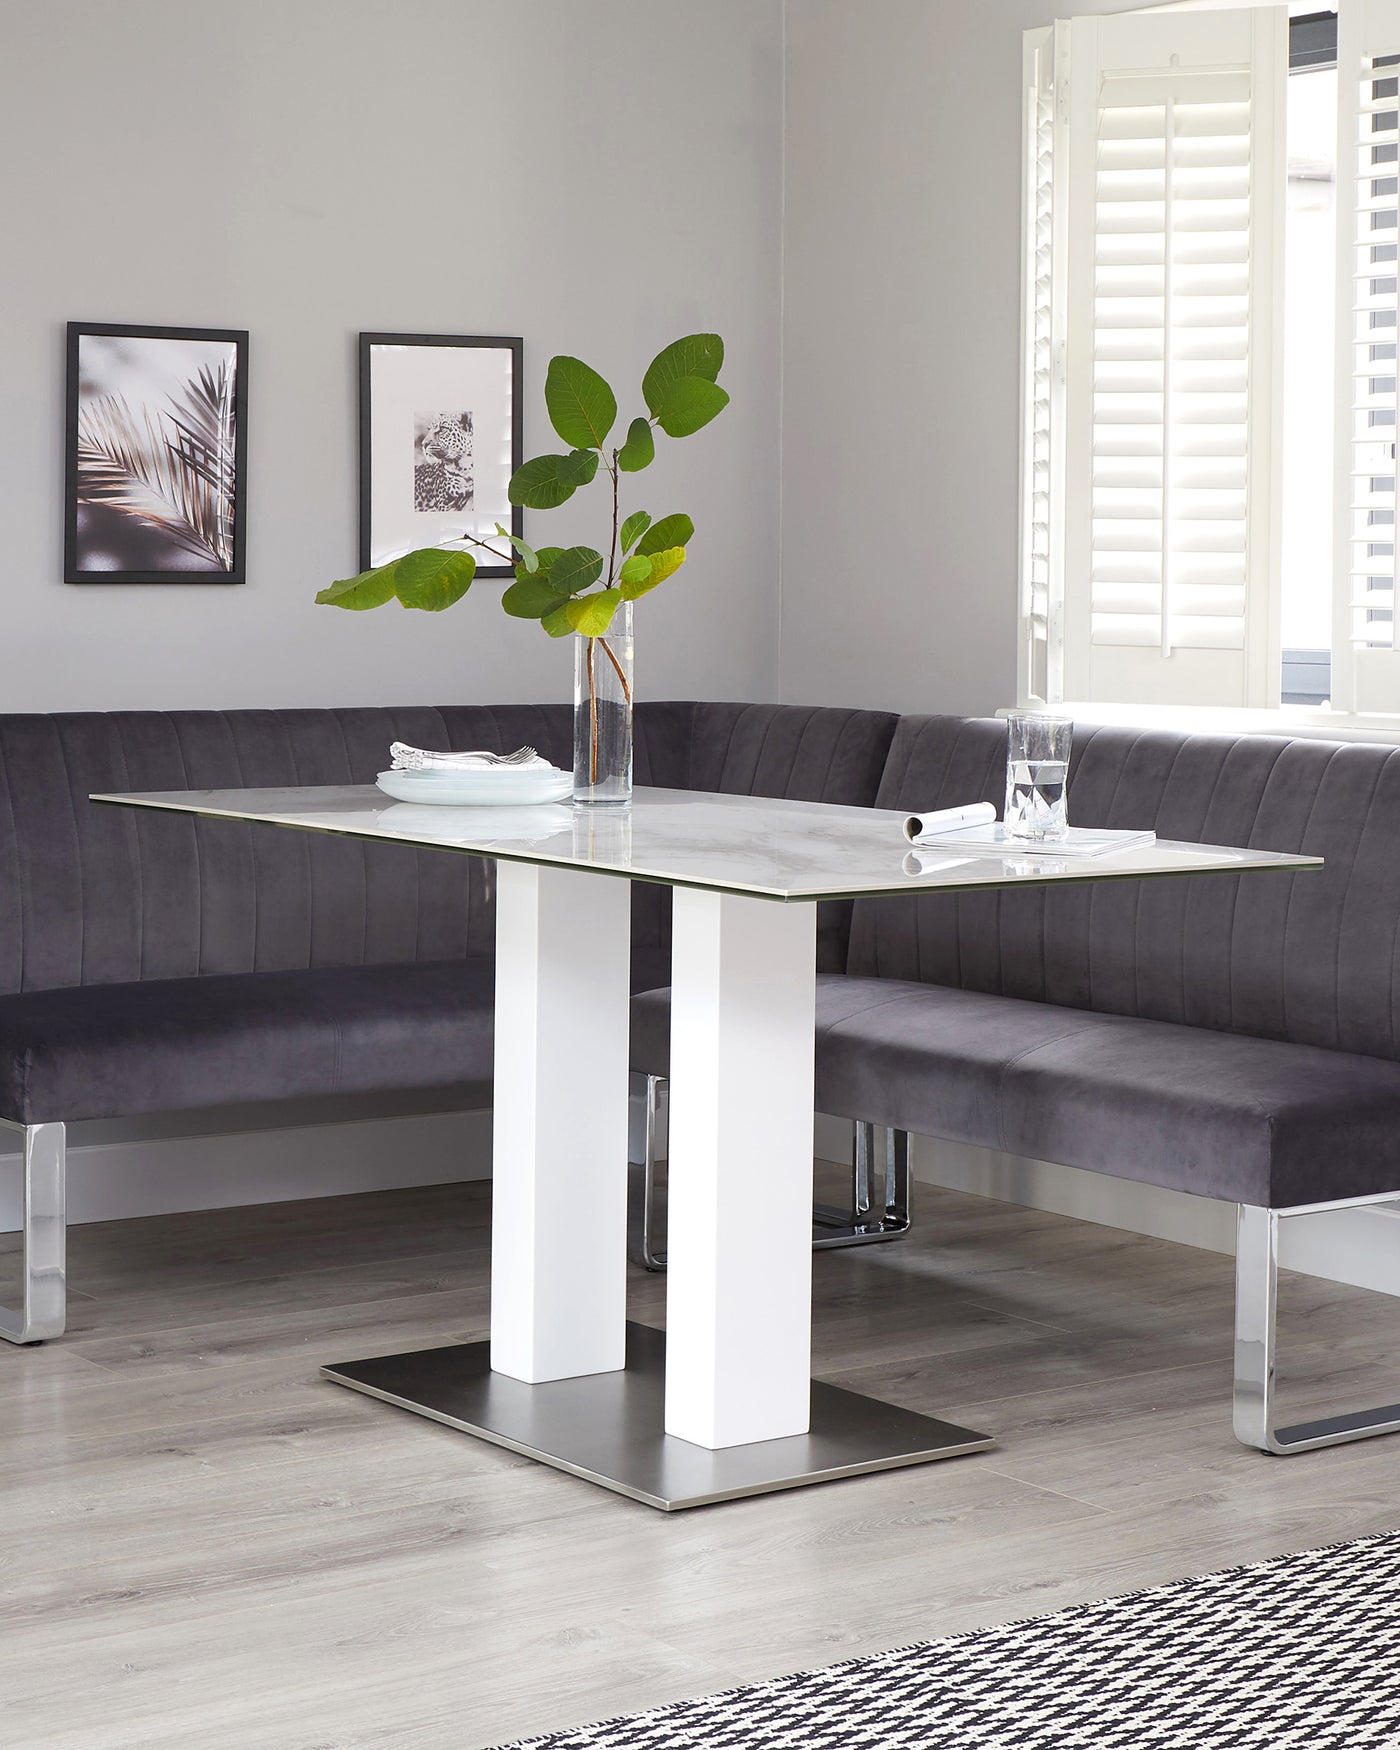 Modern dining room furniture featuring a white marble-topped table with rectangular surface, supported by two wide, white rectangular columns on a flat stainless-steel base. A matching corner bench upholstered in a tufted grey fabric provides comfortable seating along two walls.